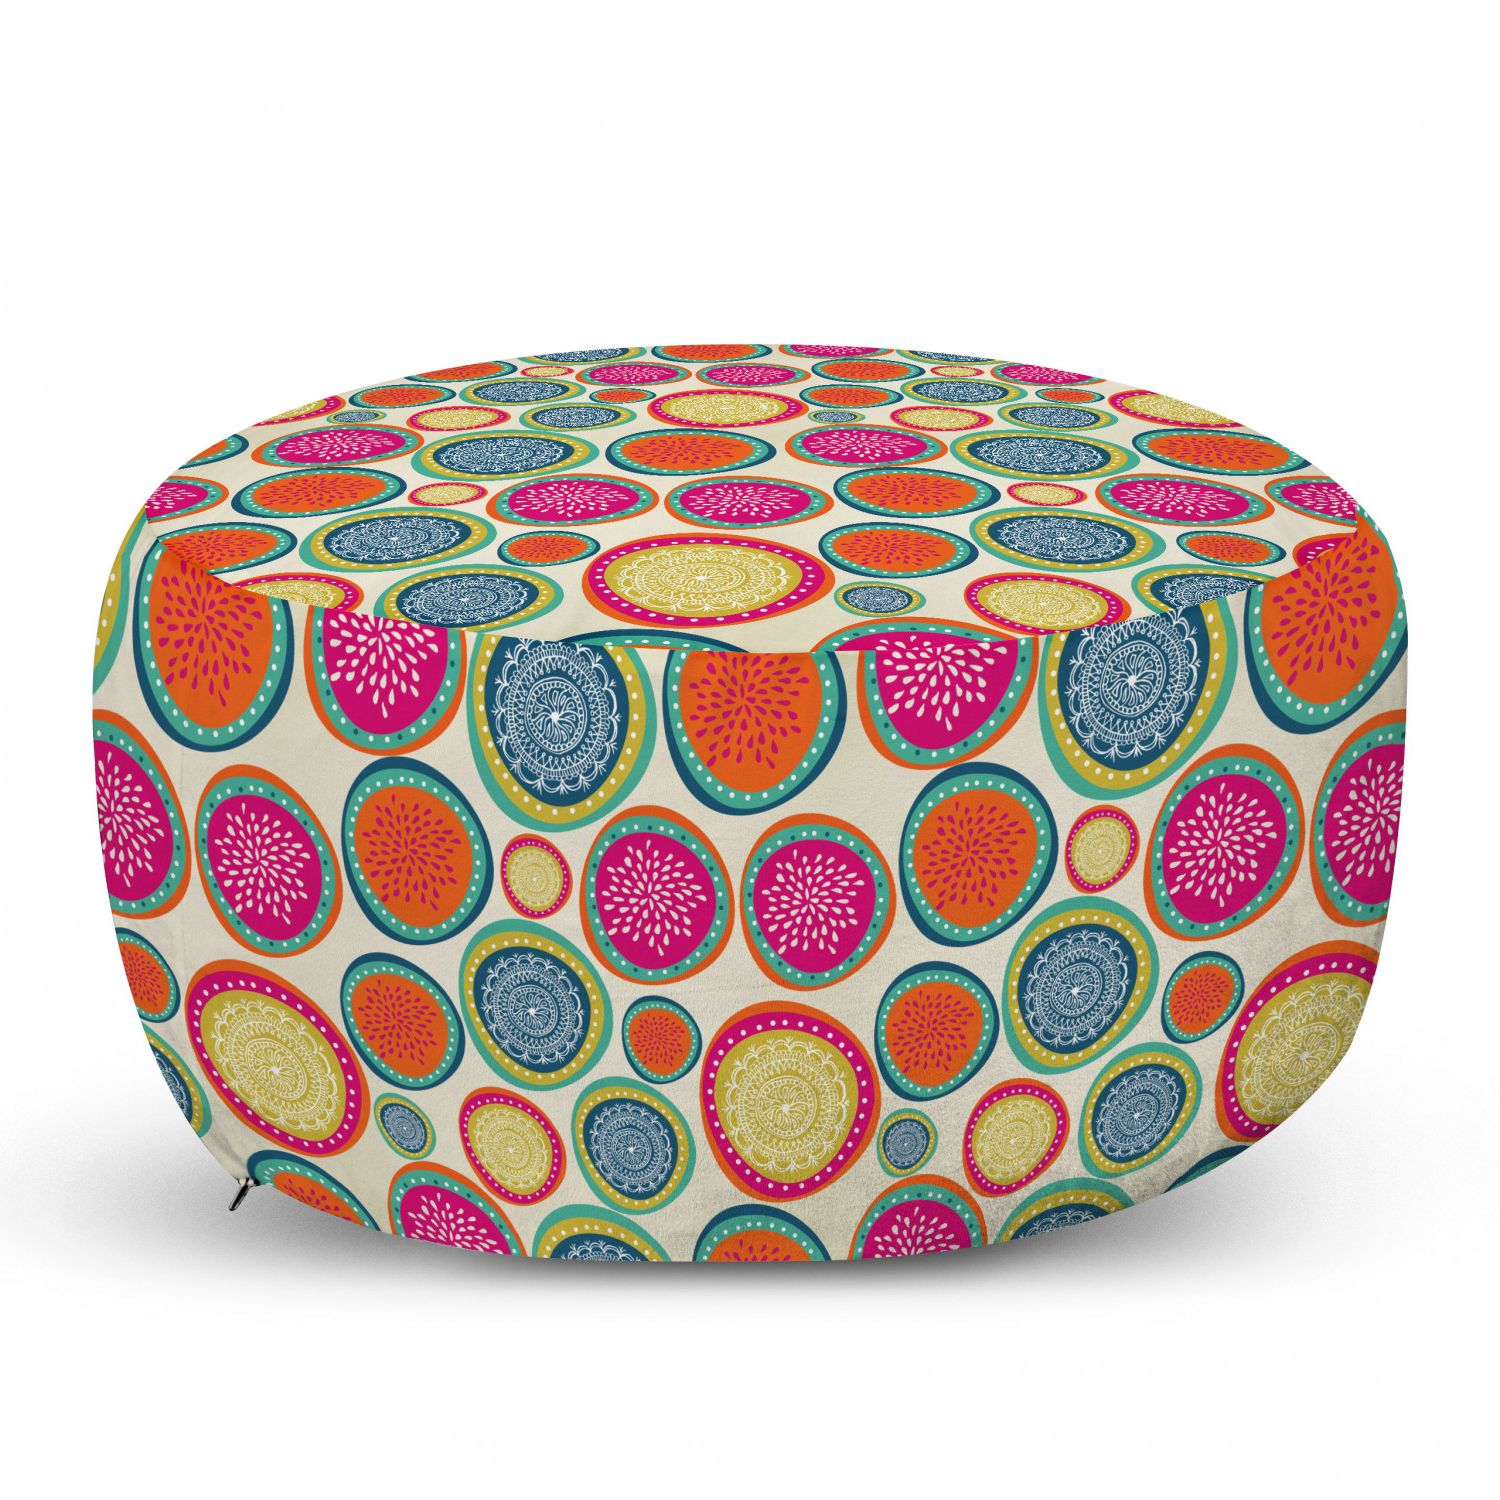 Newest Colorful Ottoman Pouf, Doodle Style Lively Colored Round Shapes With And  Floral Motifs, Decorative Soft Foot Rest With Removable Cover Living Room  And Bedroom, Multicolor,ambesonne – Walmart Throughout Multicolor Ottomans (View 9 of 15)